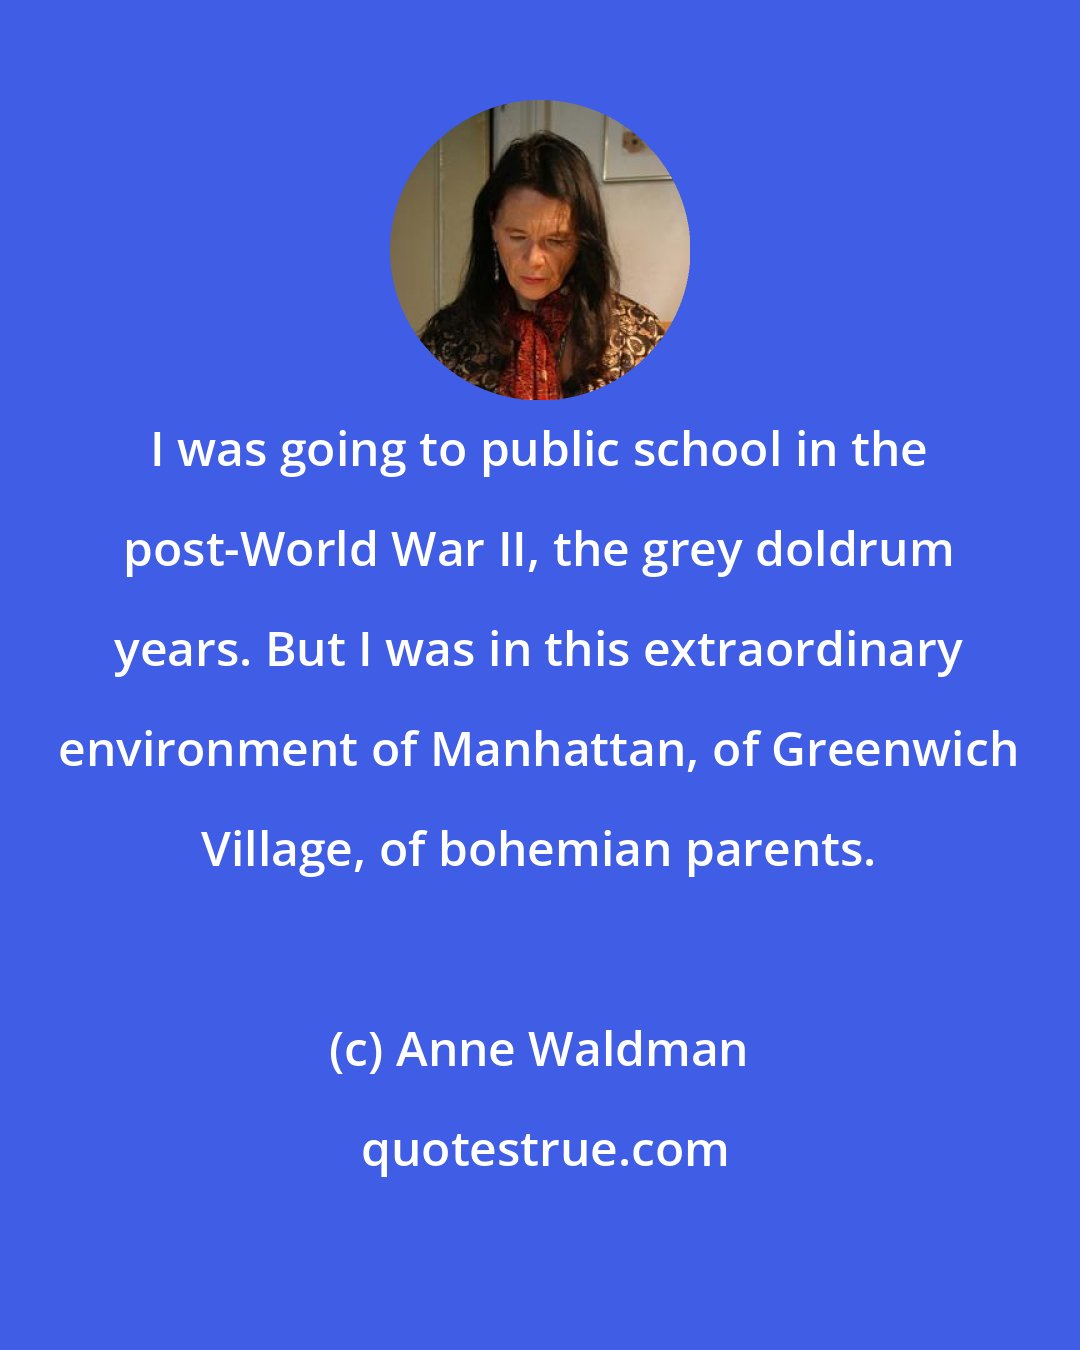 Anne Waldman: I was going to public school in the post-World War II, the grey doldrum years. But I was in this extraordinary environment of Manhattan, of Greenwich Village, of bohemian parents.